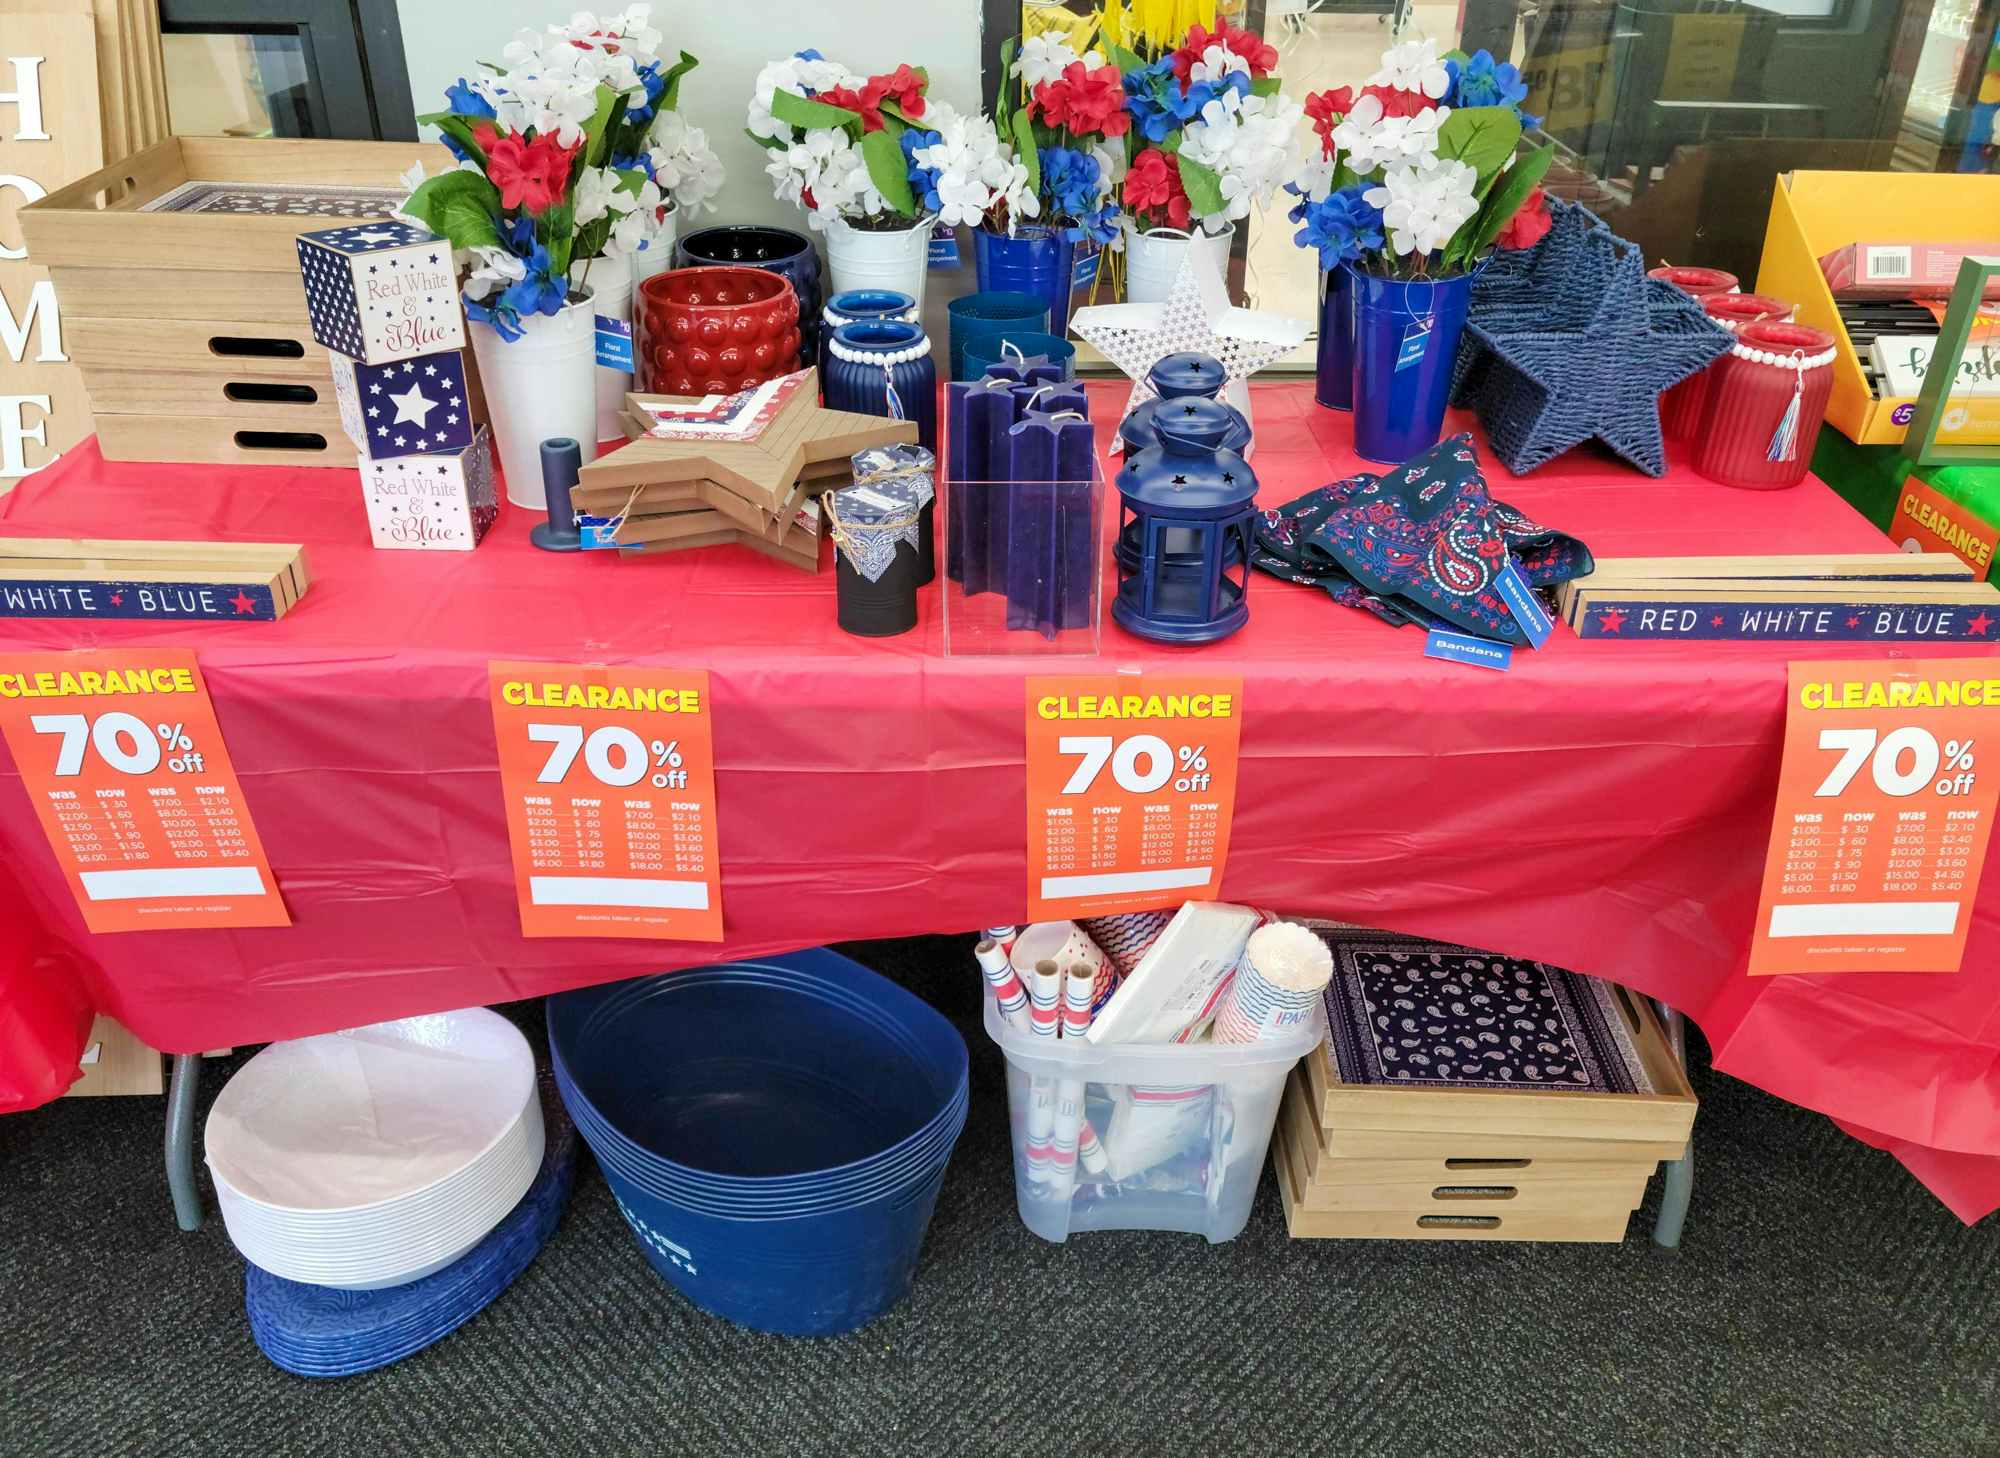 Up to 90% off Dollar General Clearance Event, $0.10 Valentine's Day, $0.25  Hats & Scarves + more!